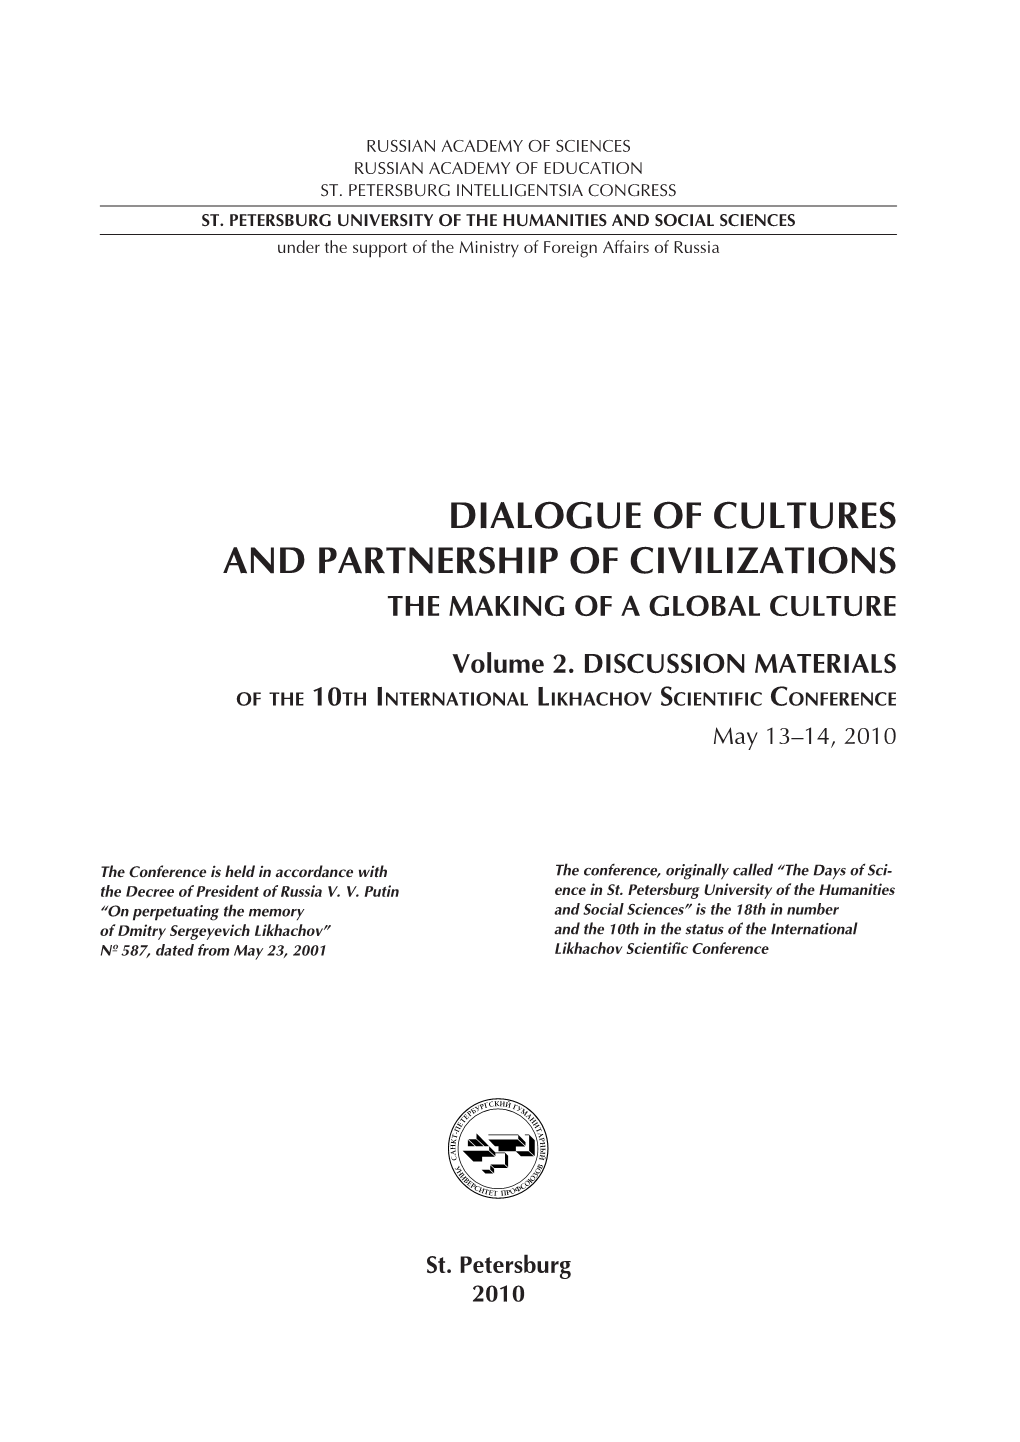 Dialogue of Cultures and Partnership of Civilizations the Making of a Global Culture